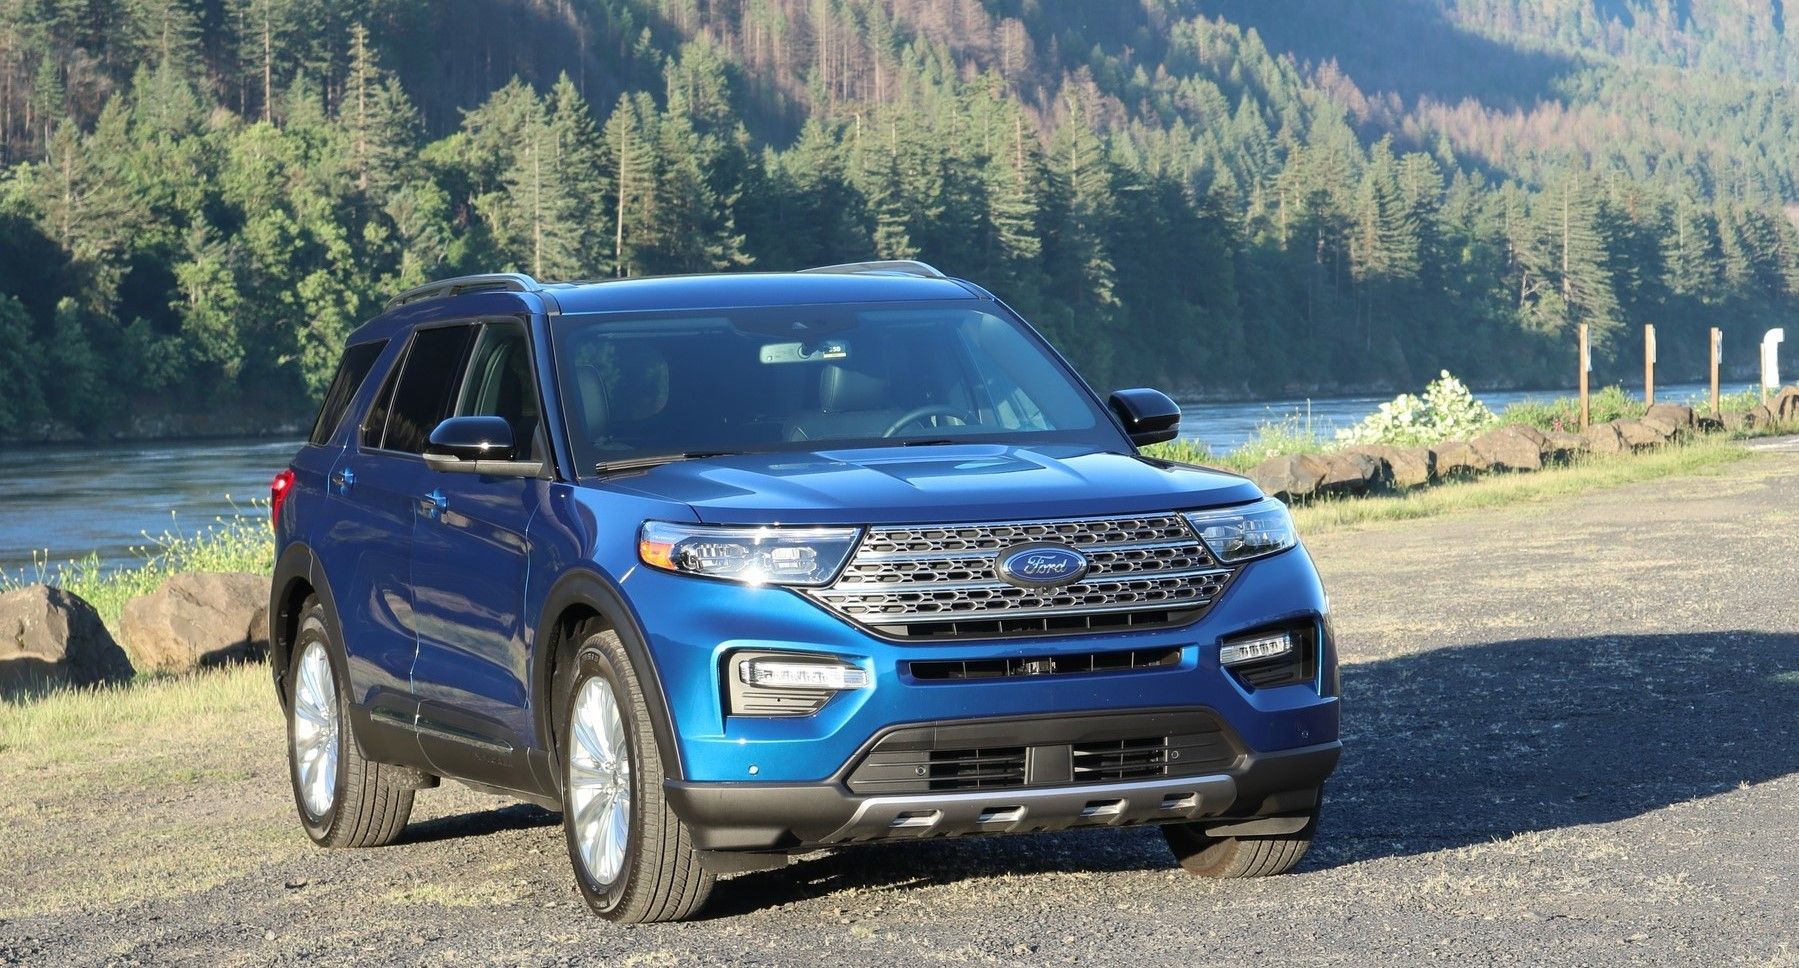 First Drive: 2020 Ford Explorer | Driving